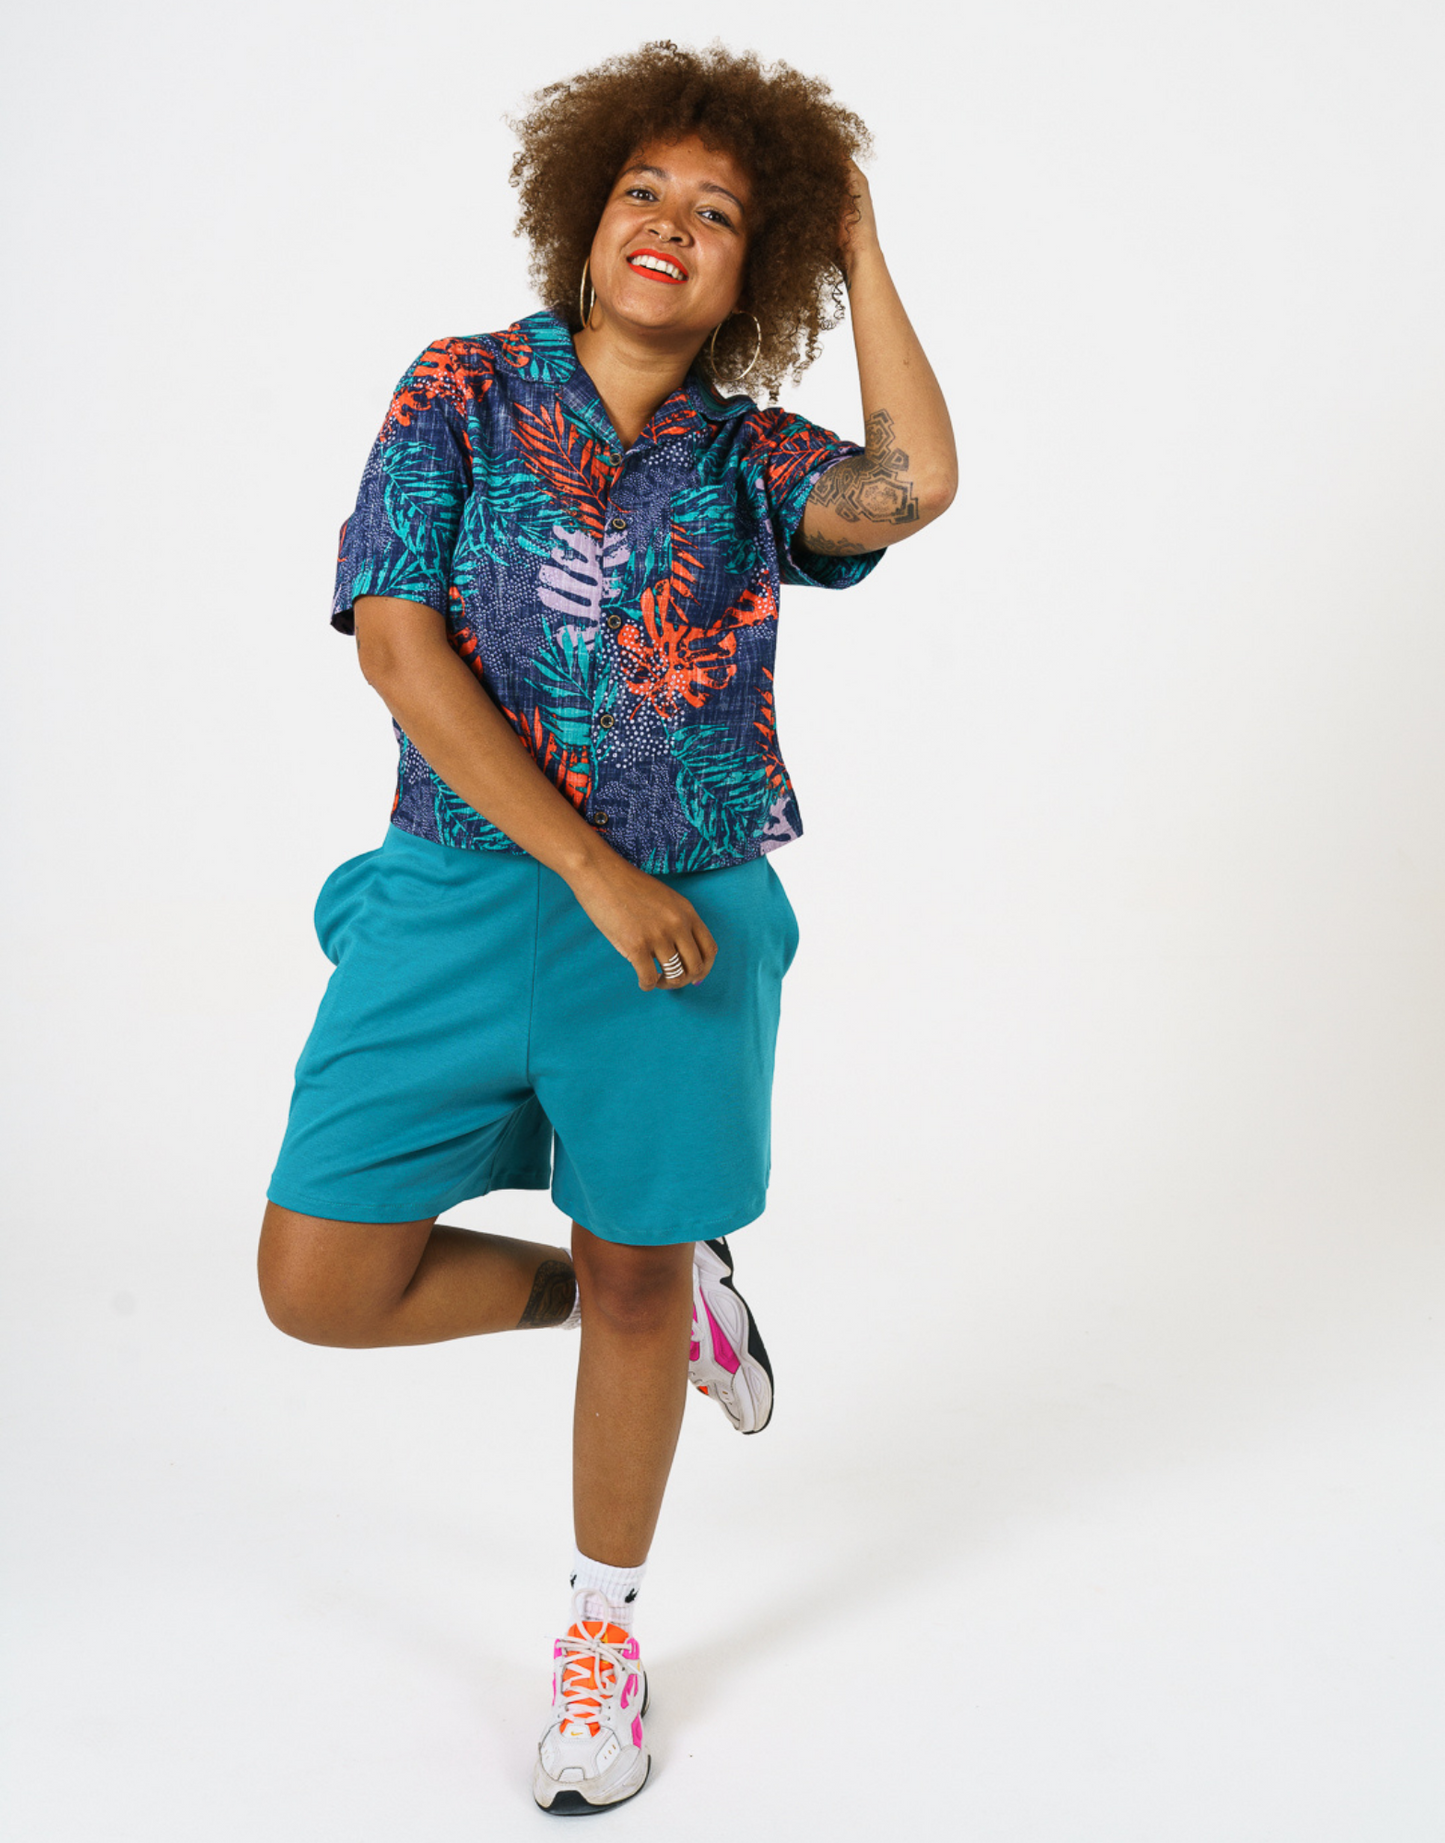 Digital Printed Cotton womens shirt, in bright teal and orange leaf print, paired with our longer length teal Jersey shorts and styles with Bright trainers and socks. 